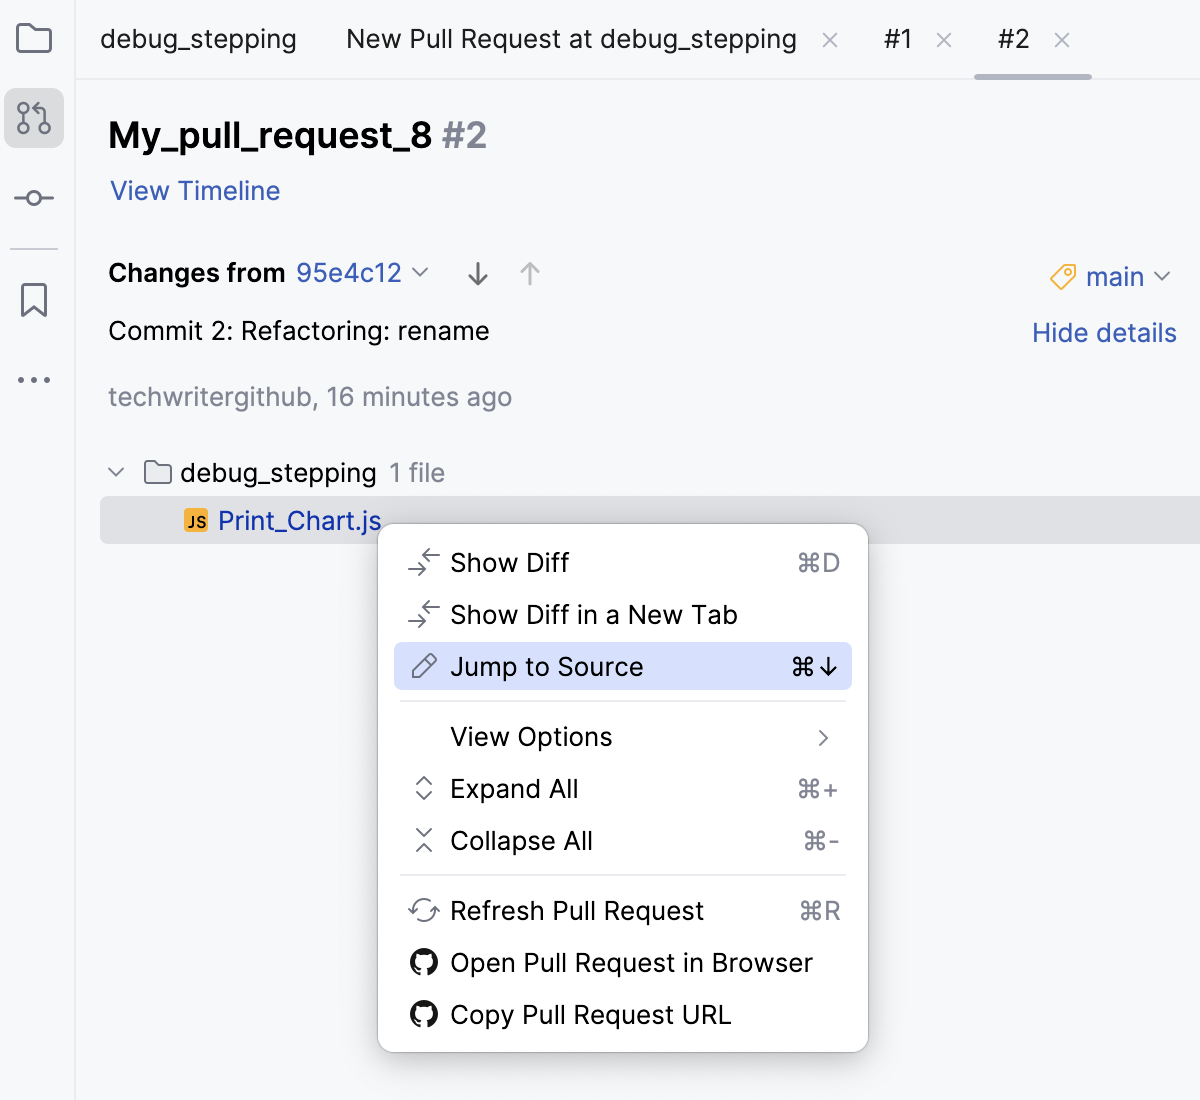 Start a review with Jump To Source